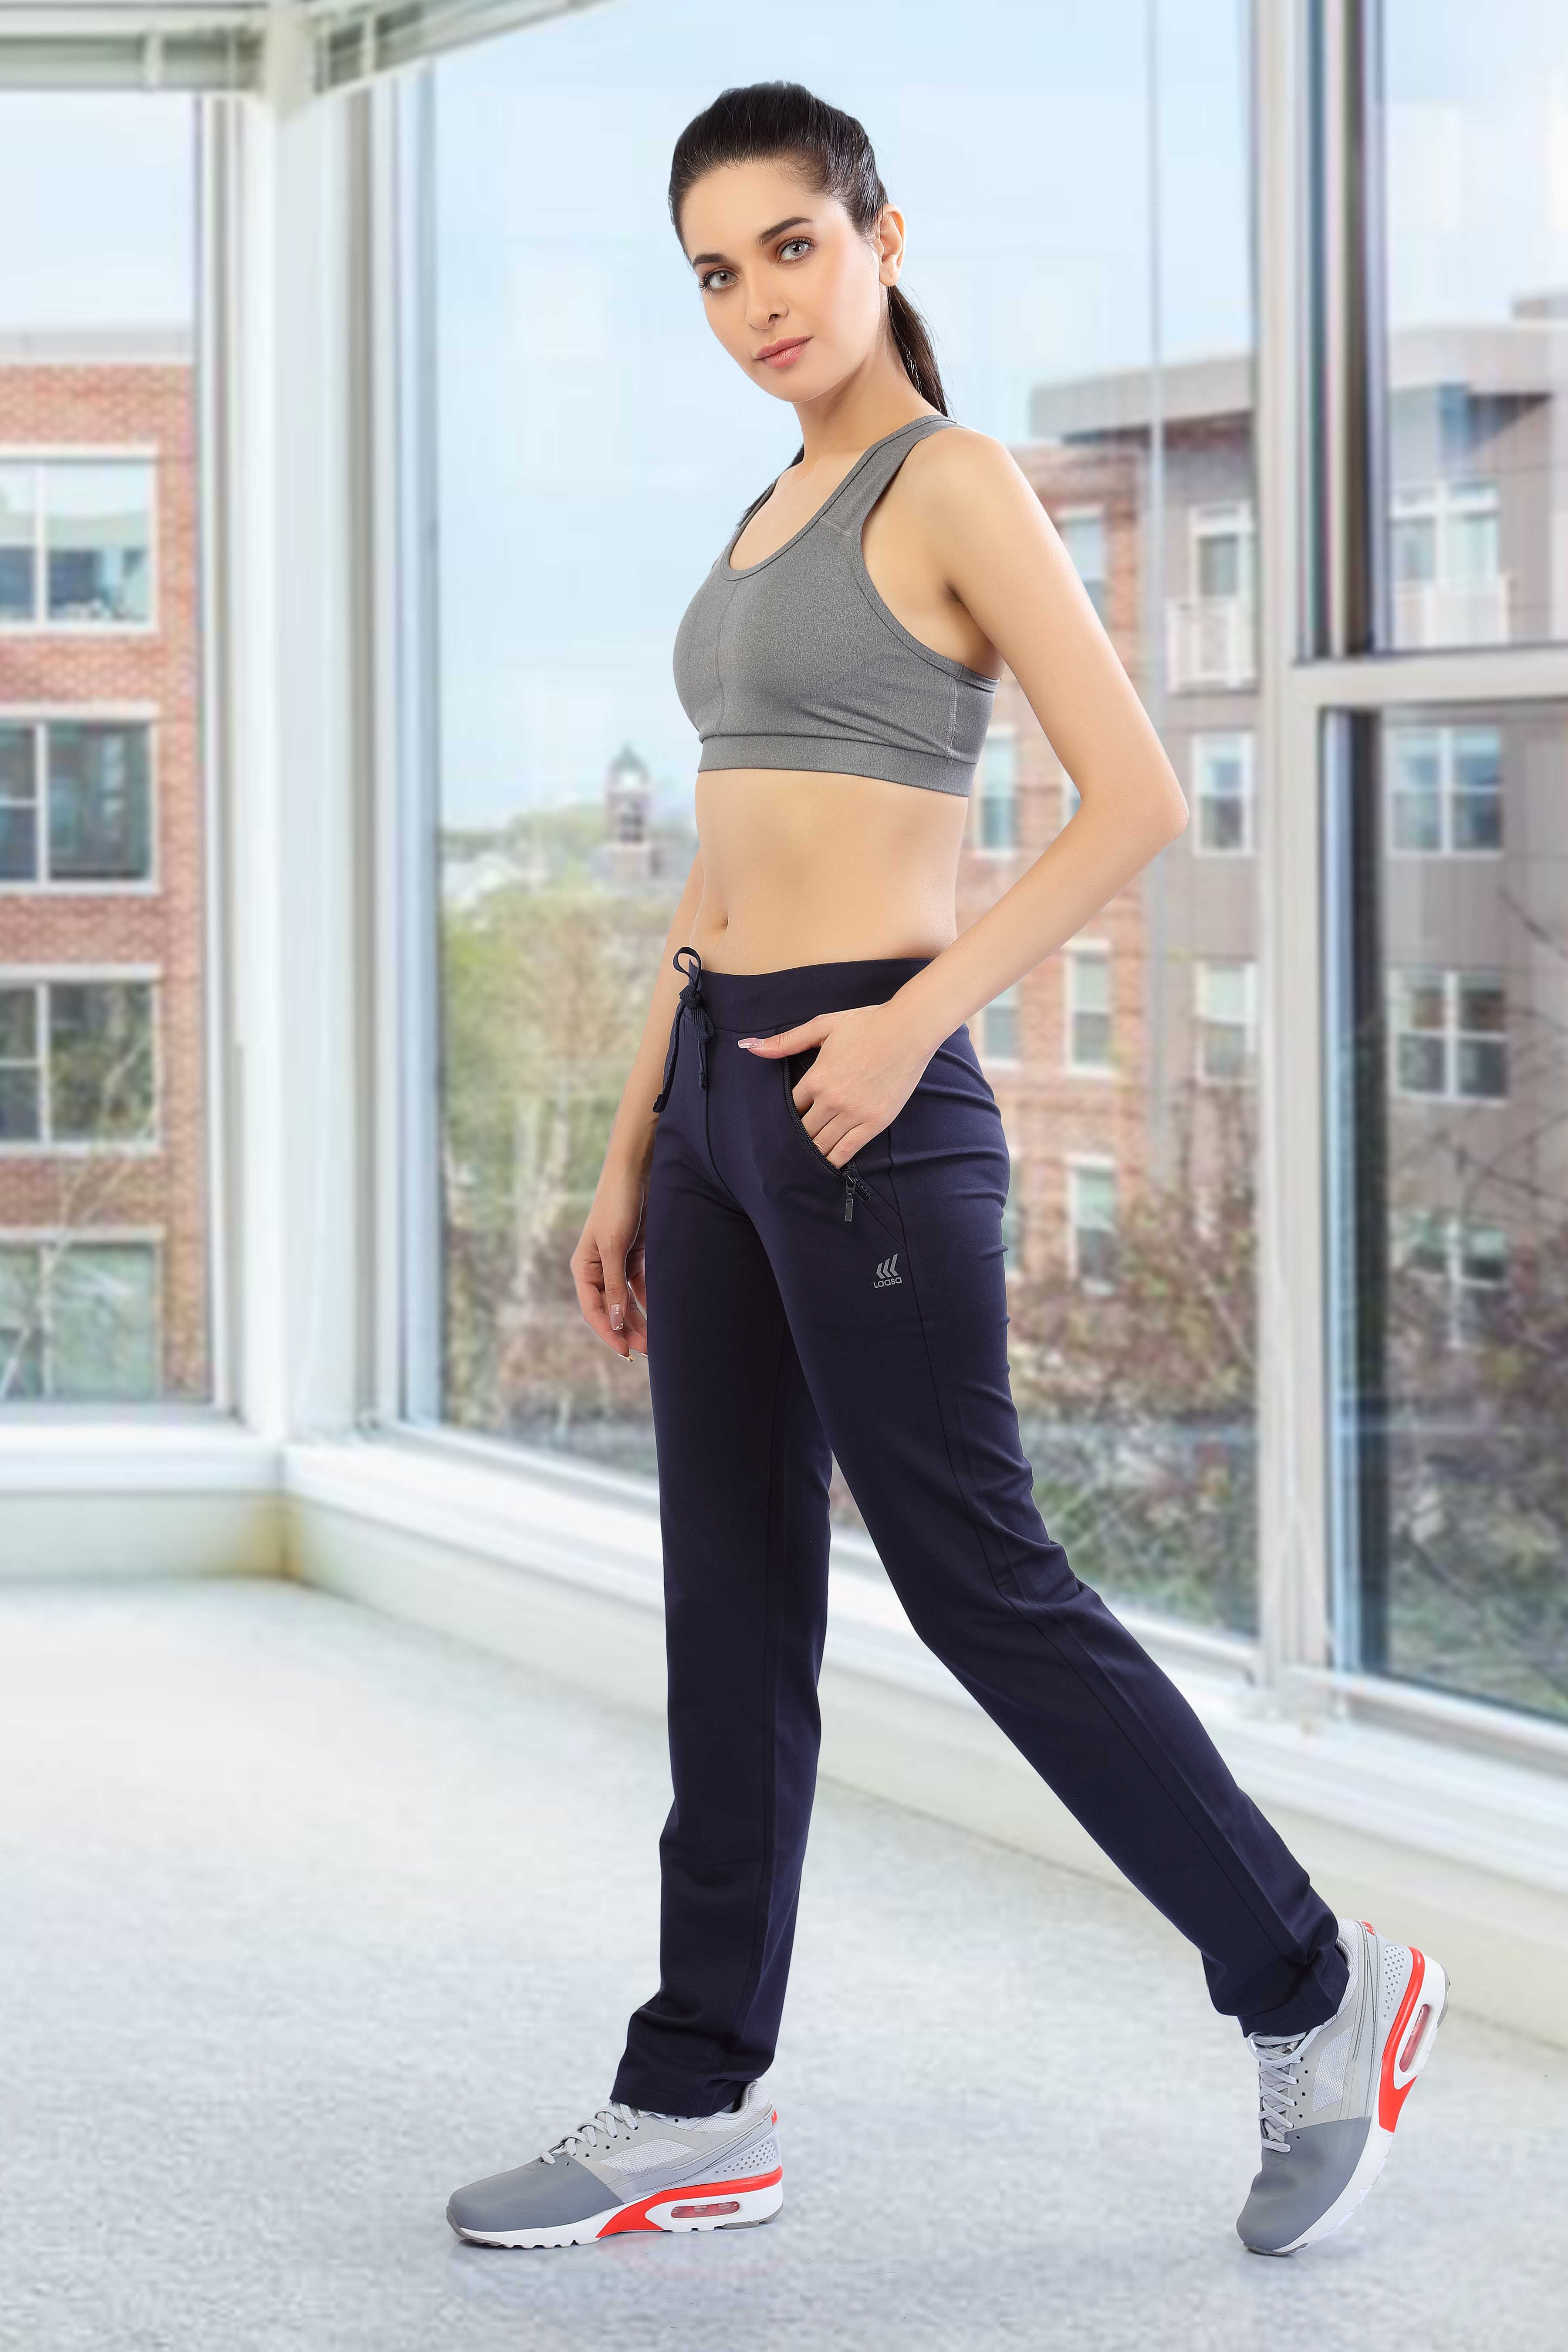 High-Quality Gym Wear for Women: Fitness Gear Producers